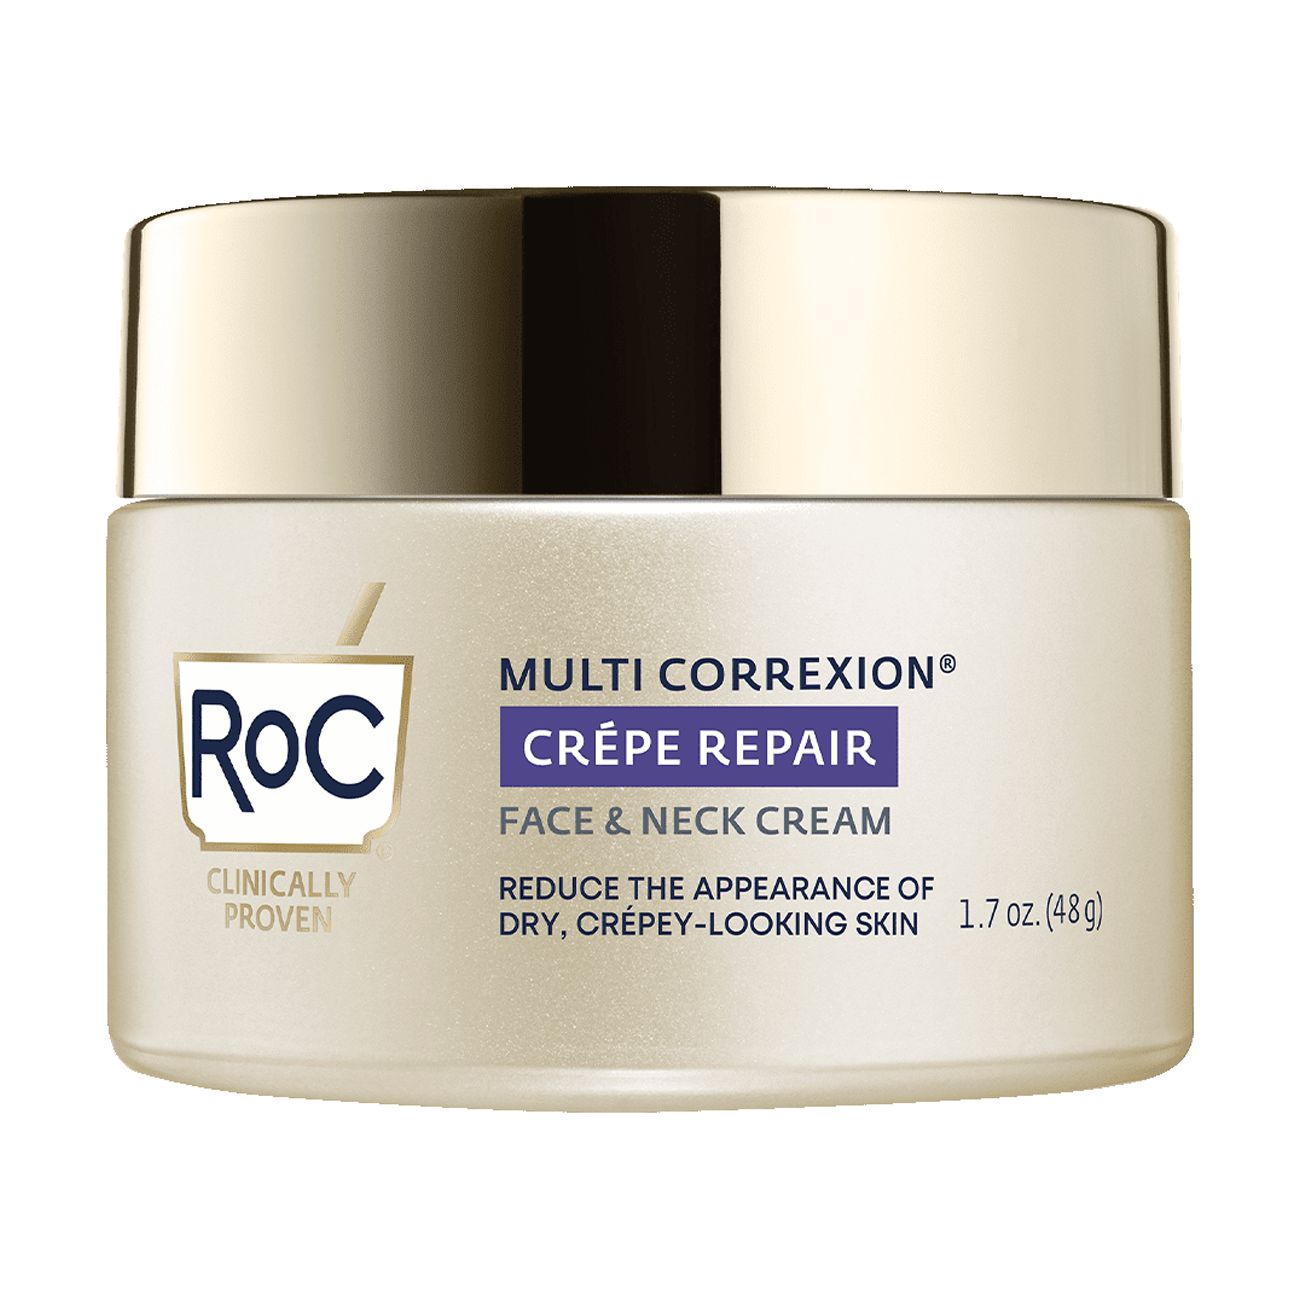 Roc Multi Correxion Anti-Aging Moisturizer, Firming Cream for Dry & Crepey Skin, 1.7 oz - image 1 of 11